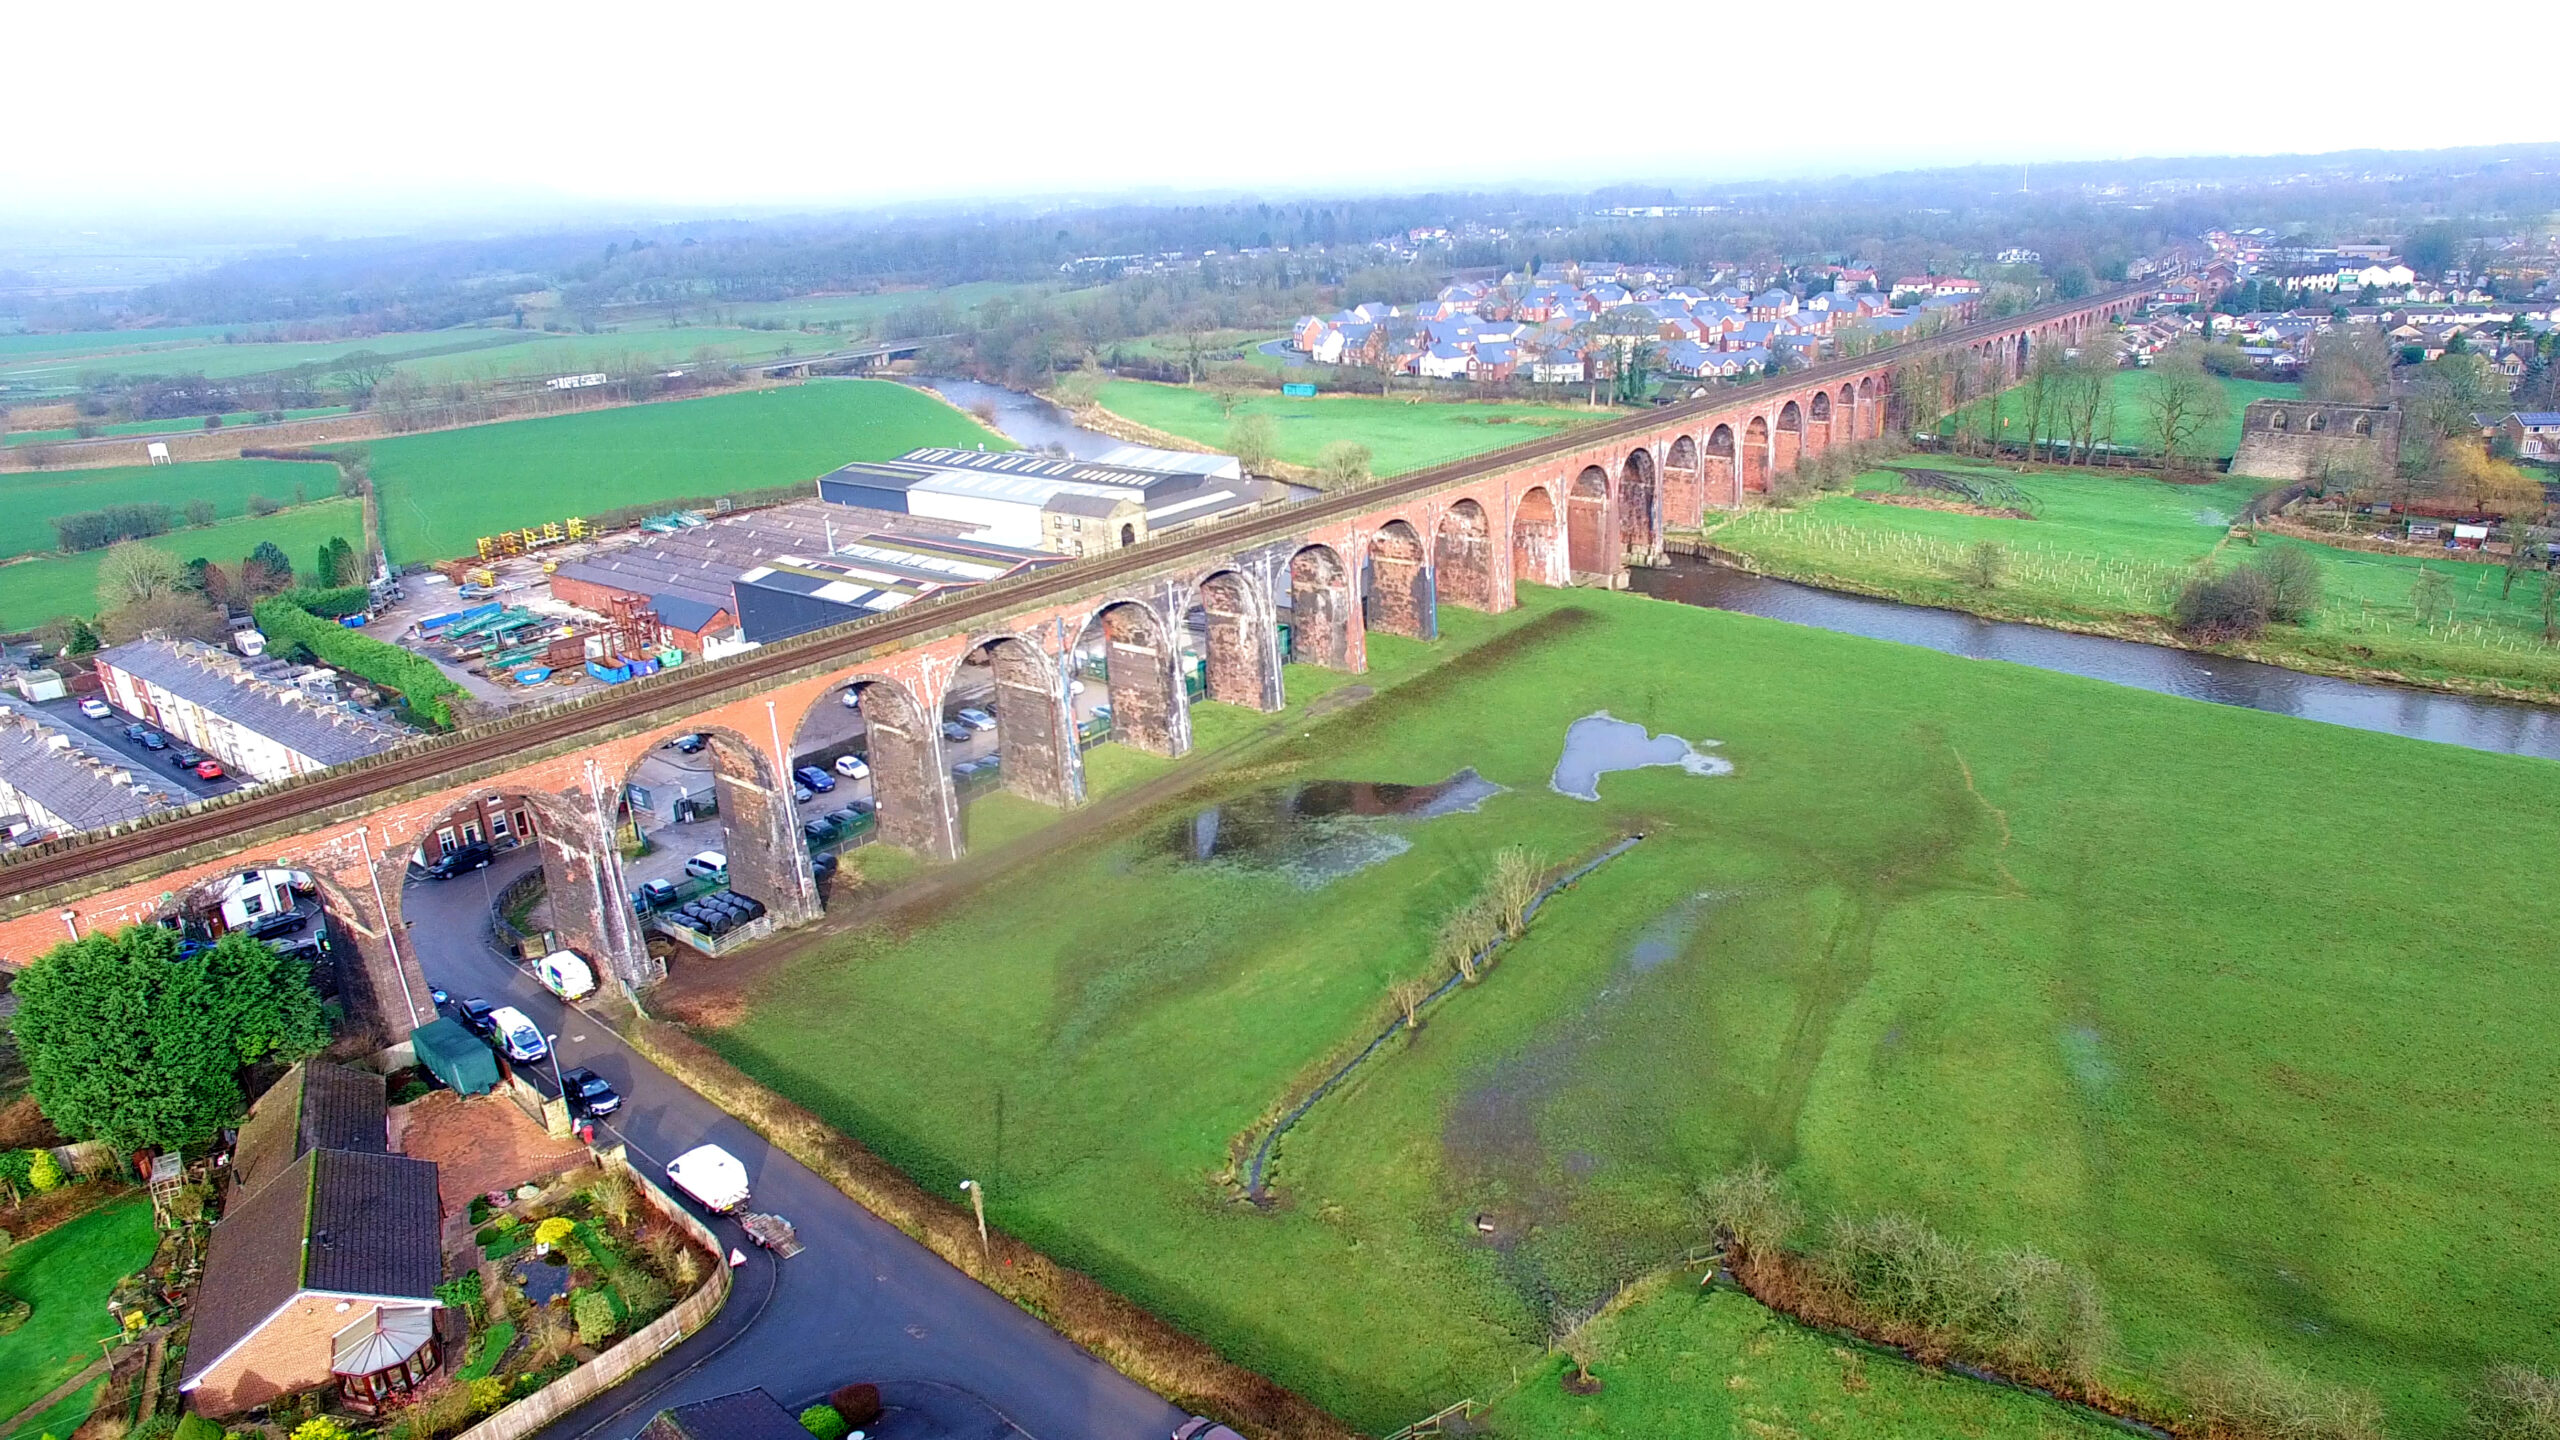 Your railway: bridges and viaducts